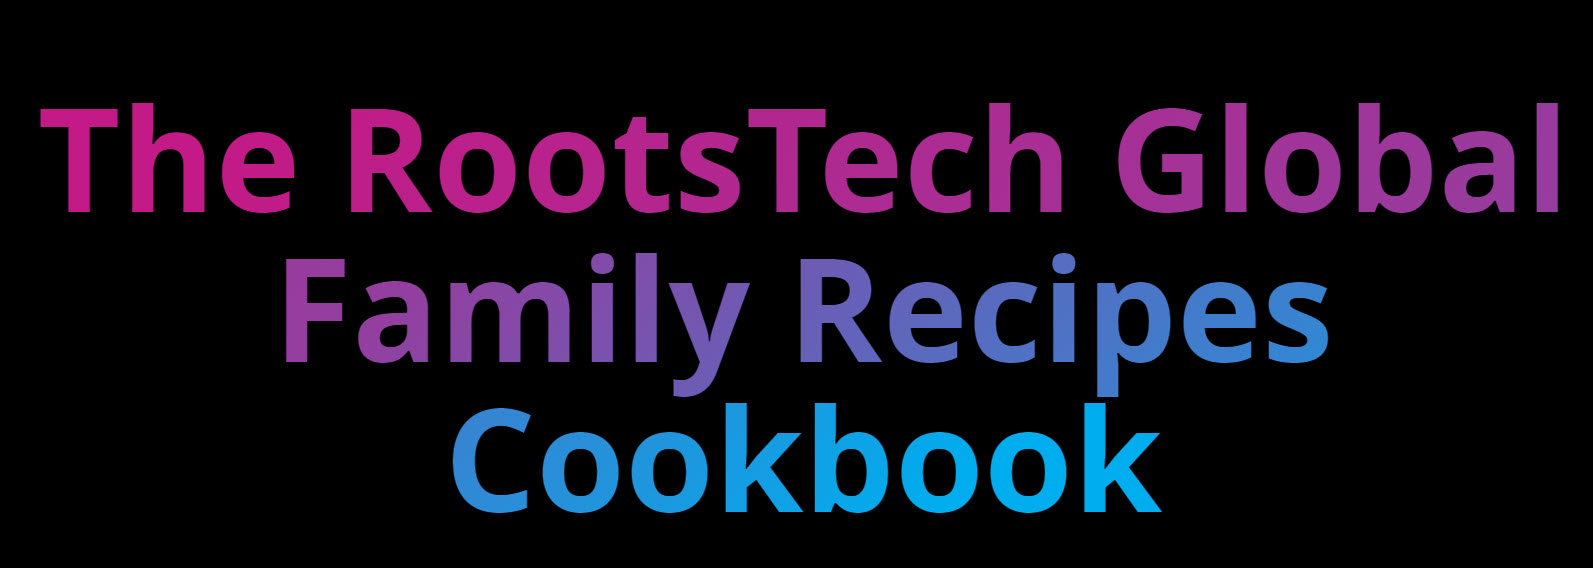 RootsTech Global Family Recipe Cookbook: How to Participate